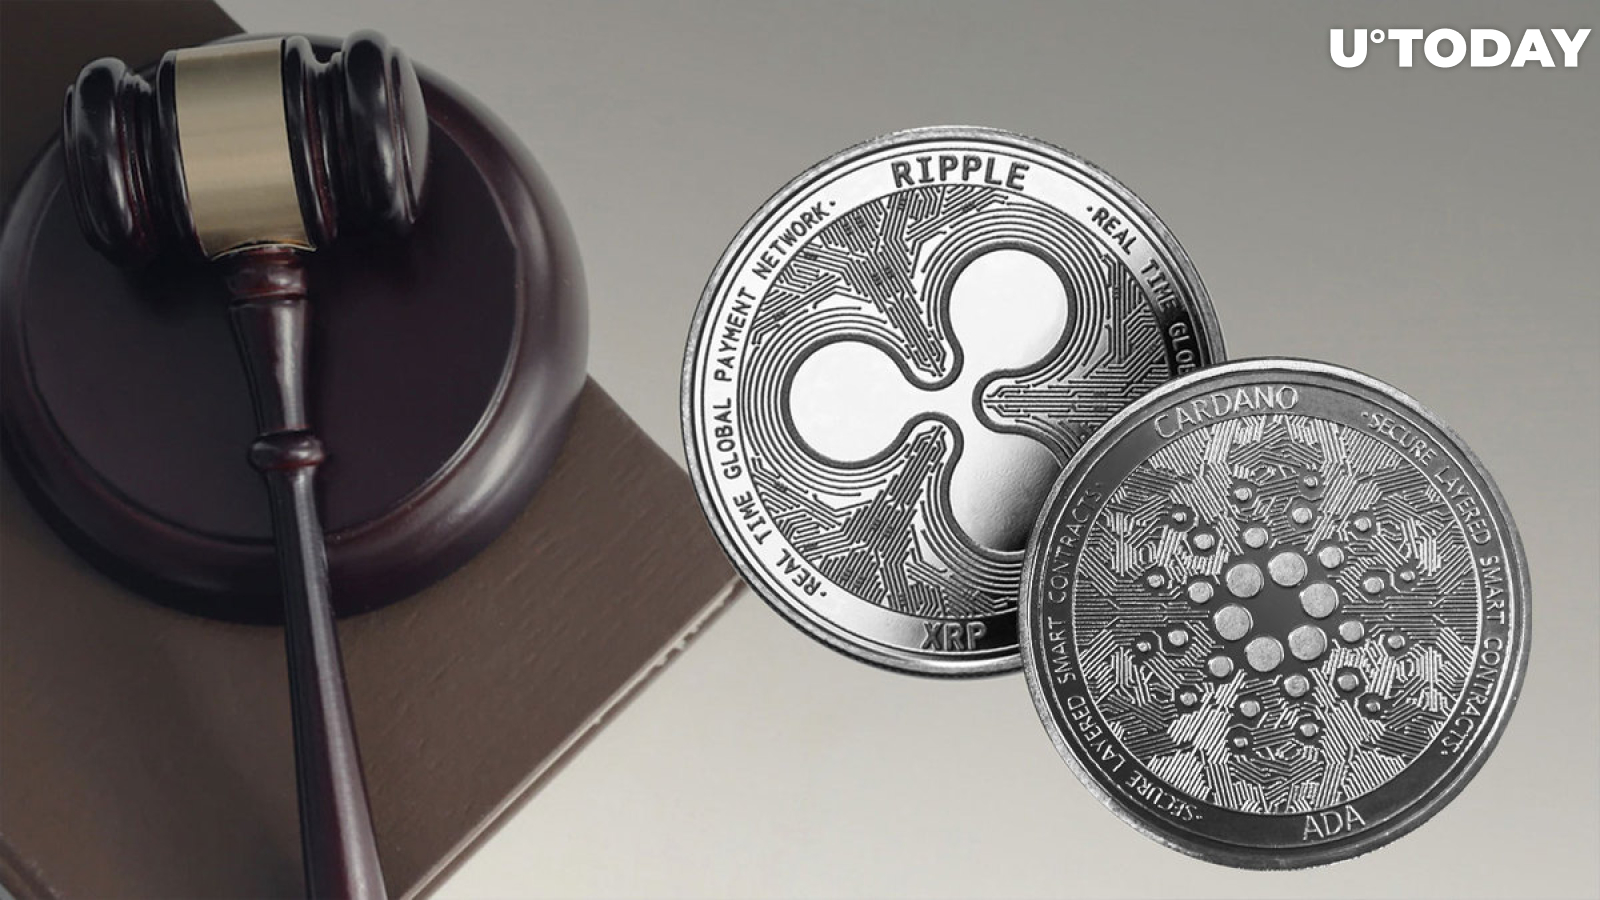 Pro-Ripple Lawyer Supports Cardano Founder's Defense of ADA, Suggests Key Thing